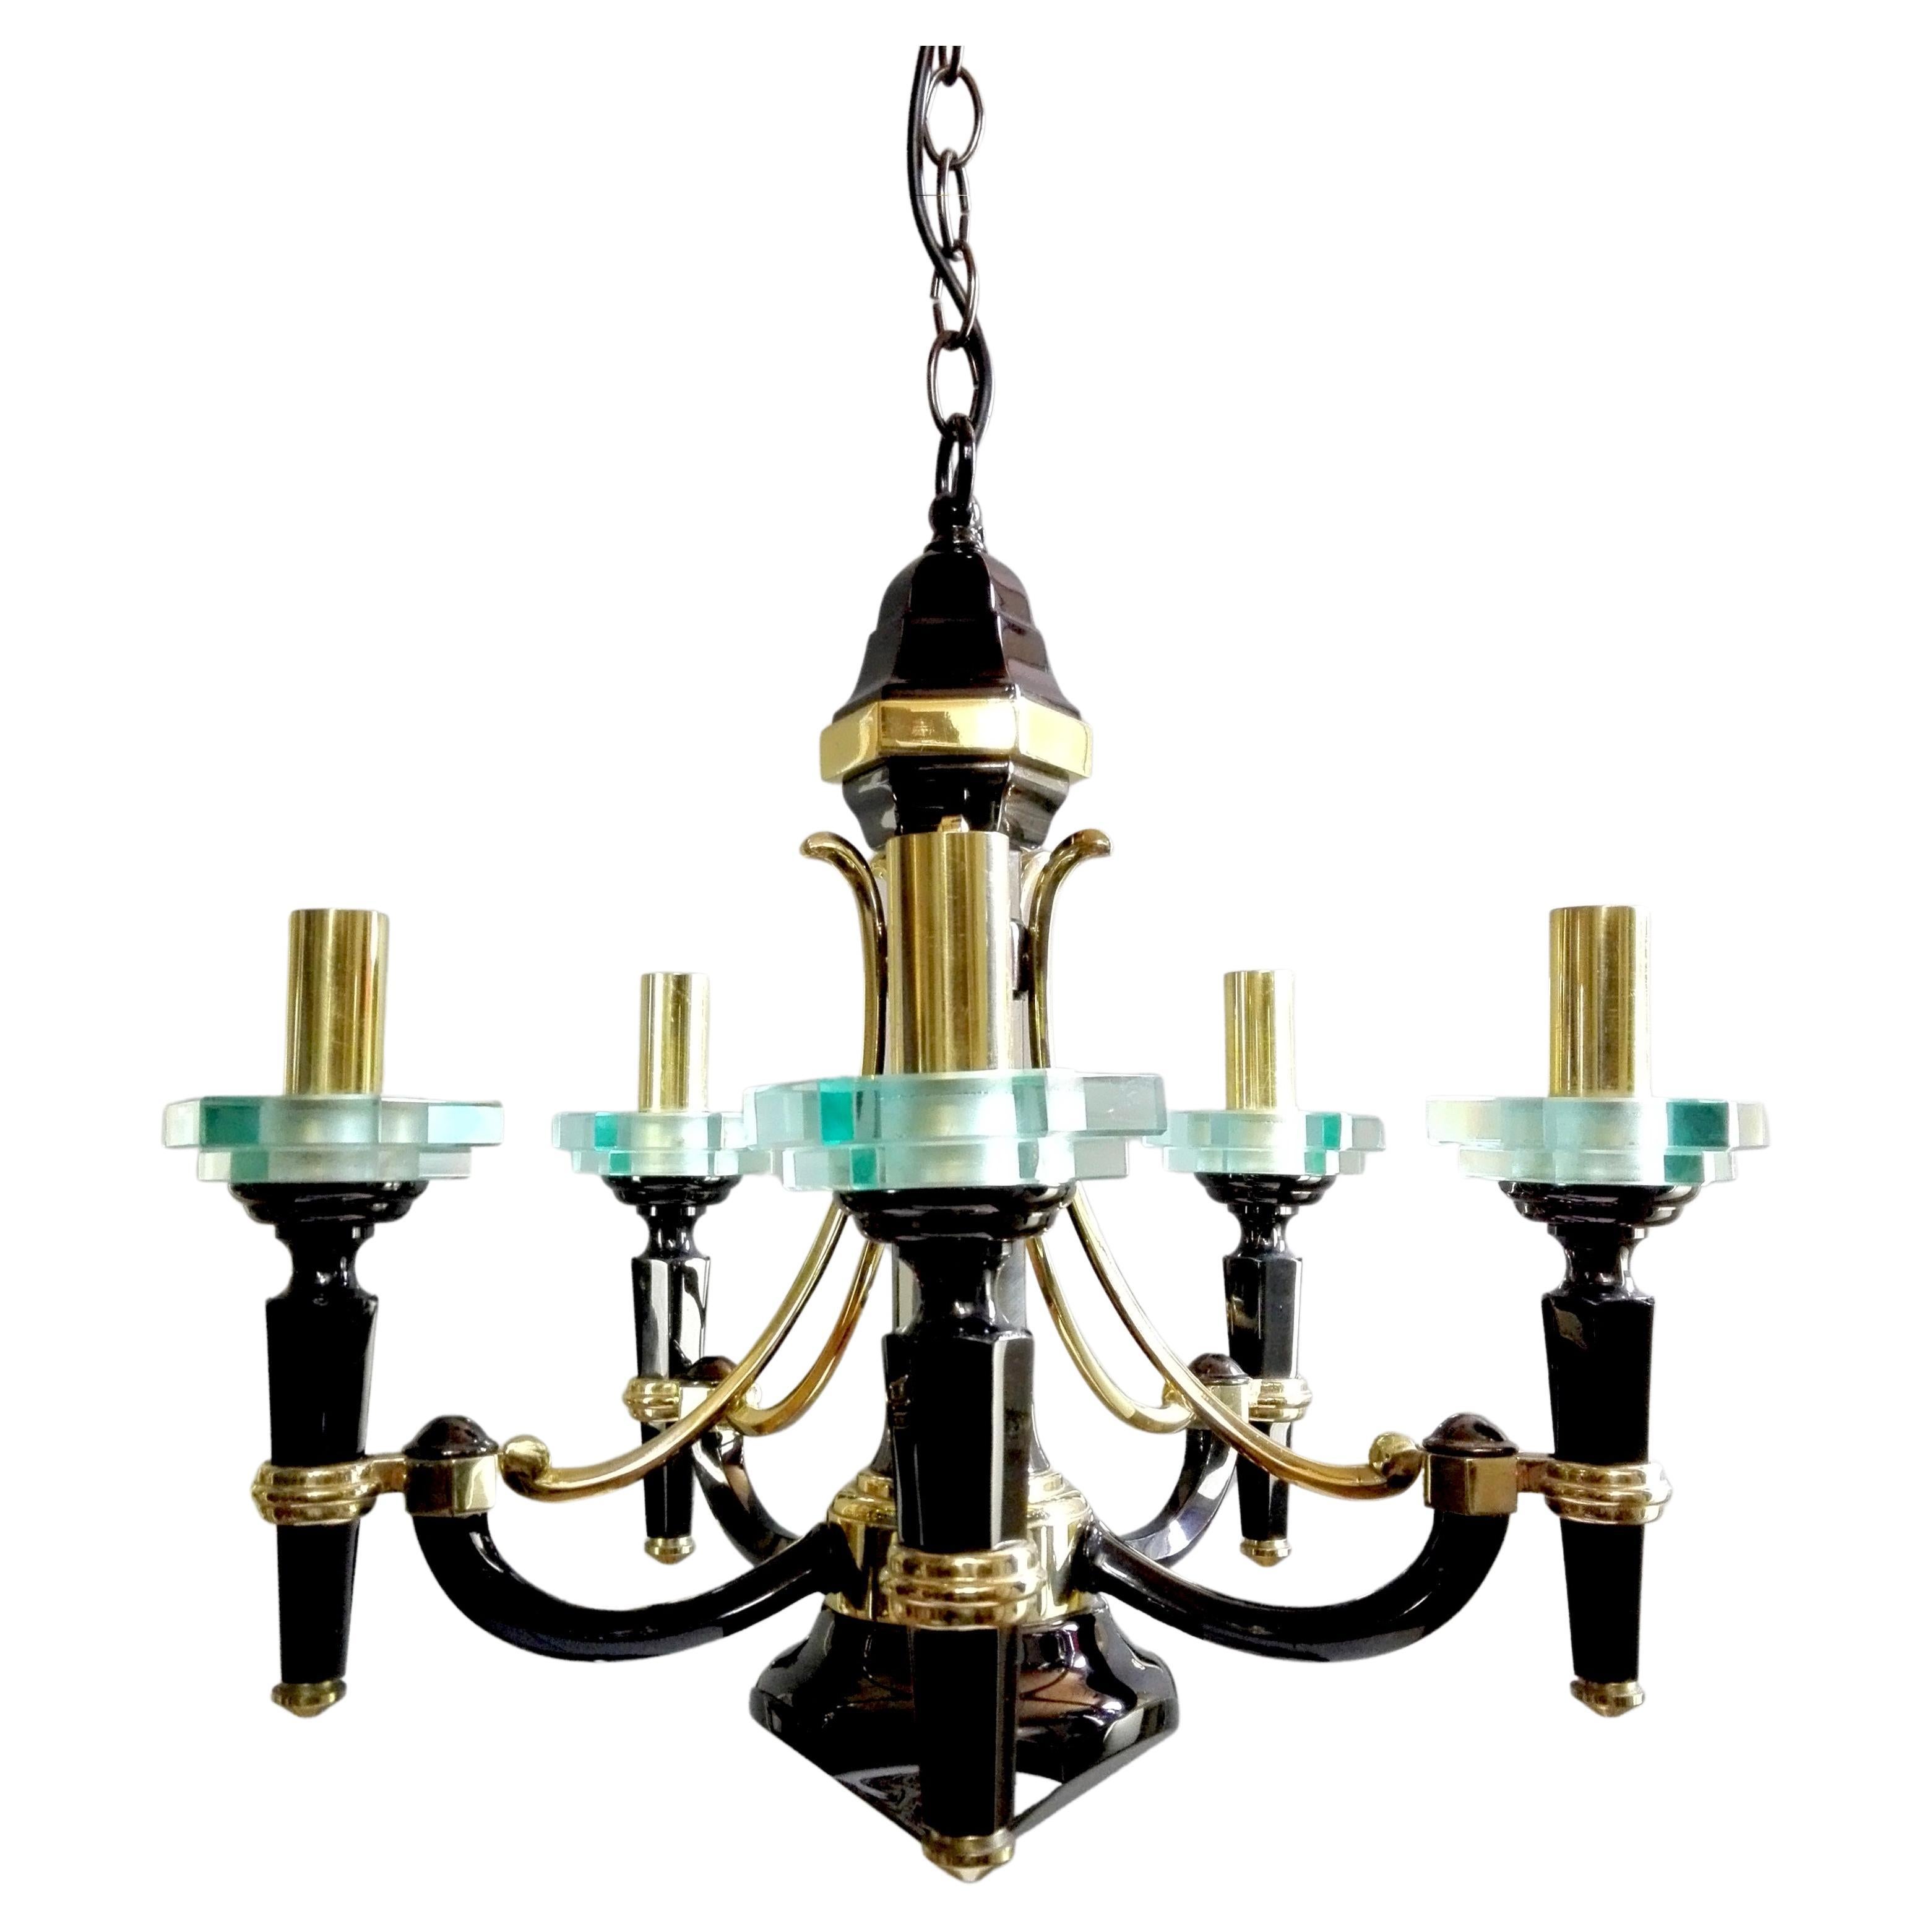 Lampart Milano attributable 70s Five-Light Chandelier, Solid Brass and Crystals. For Sale